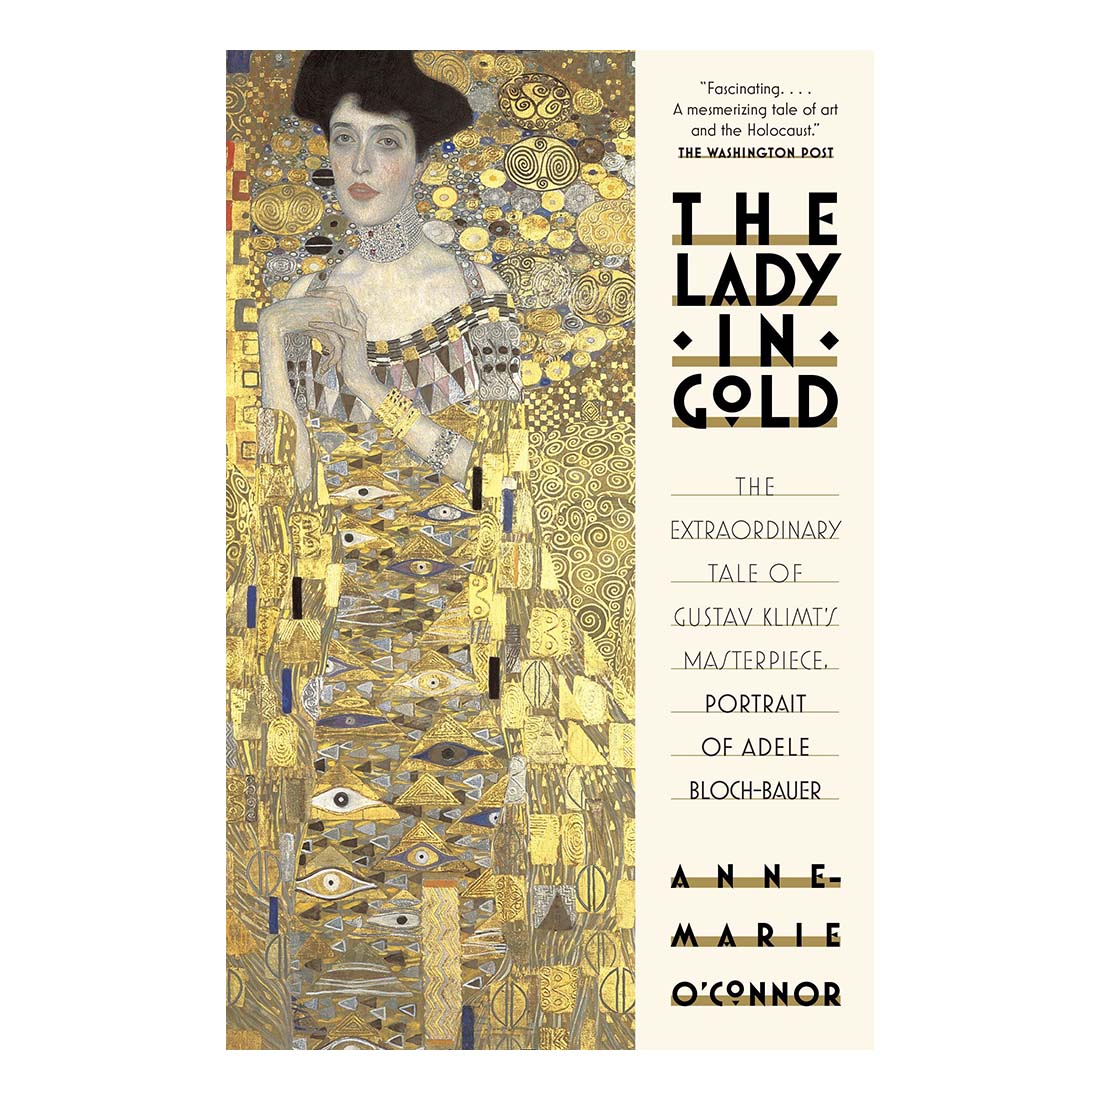 The Lady in Gold: The Extraordinary Tale of Gustav Klimt&#39;s Masterpiece, Portrait of Adele Bloch-Bauer